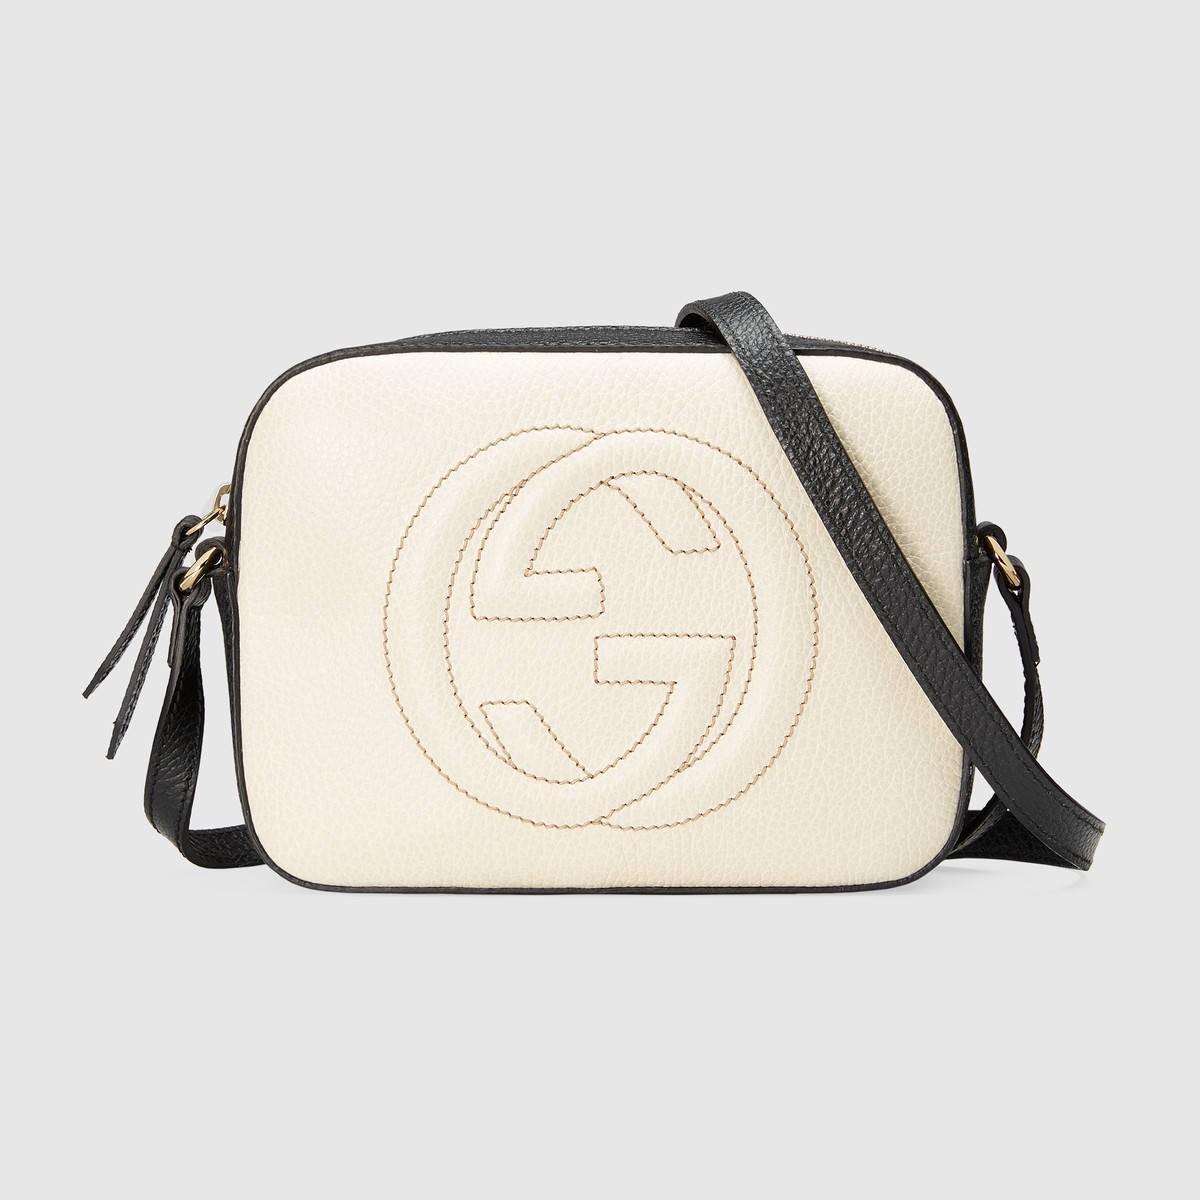 Gucci Soho Small Leather Shoulder Bag - Black And White Leather | ModeSens